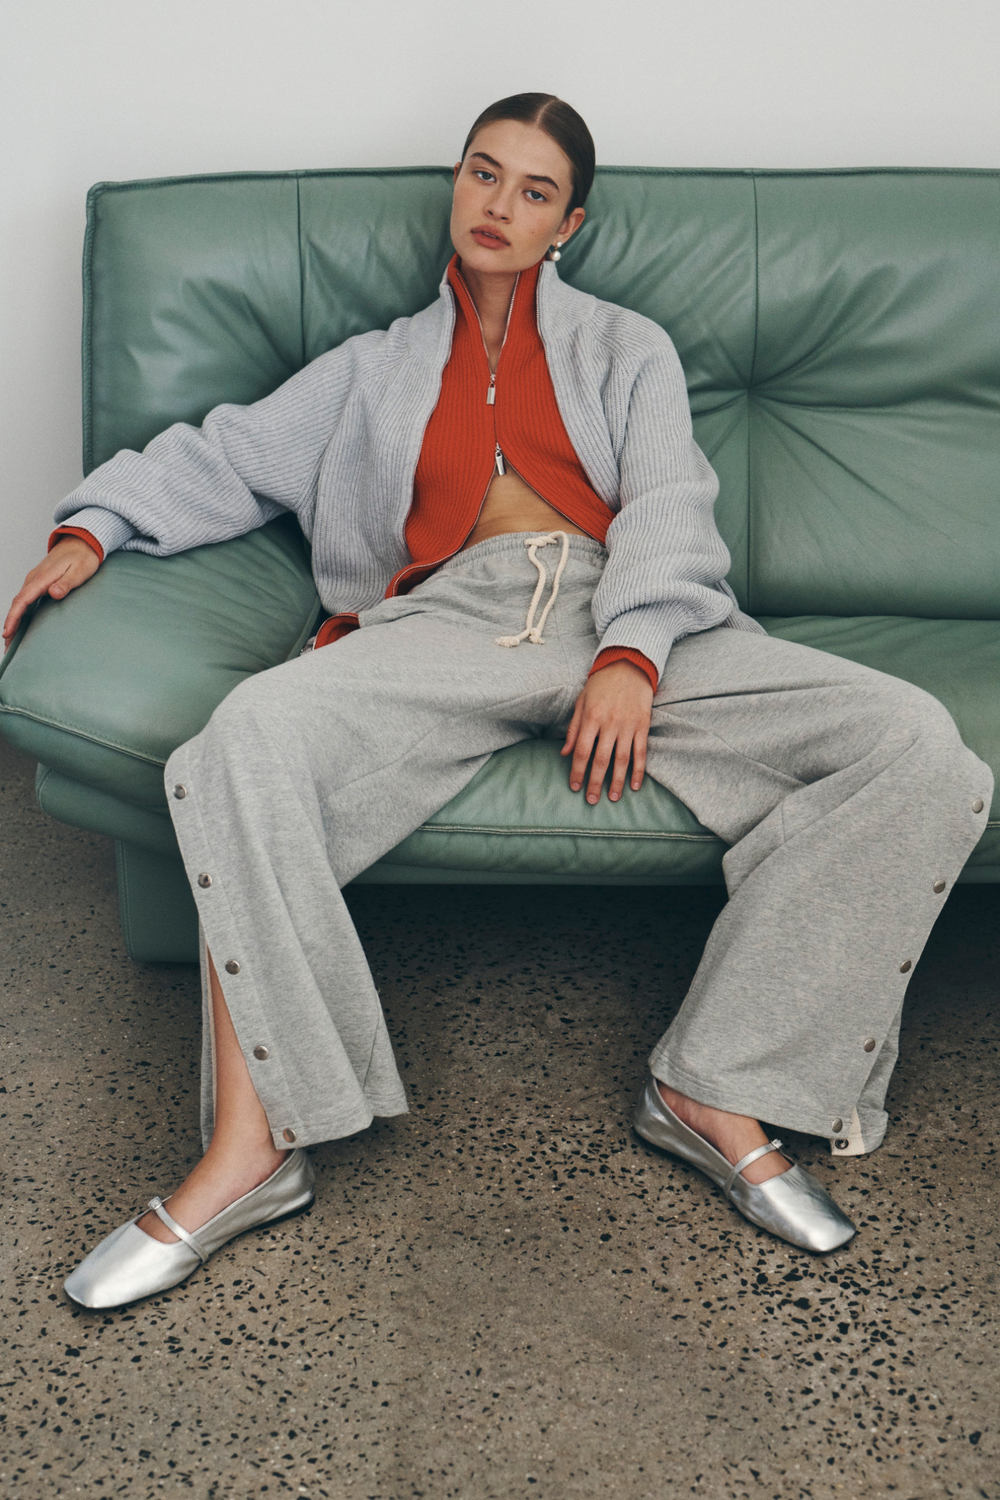 Bianca wears the Banjo Zip Knit Cardigan in both Crimson Red and Grey Marle paired with the Vena Terry Snap Pants in Grey Marle. Bianca lounges on a green leather sofa and accessorises with pearl drop earrings.